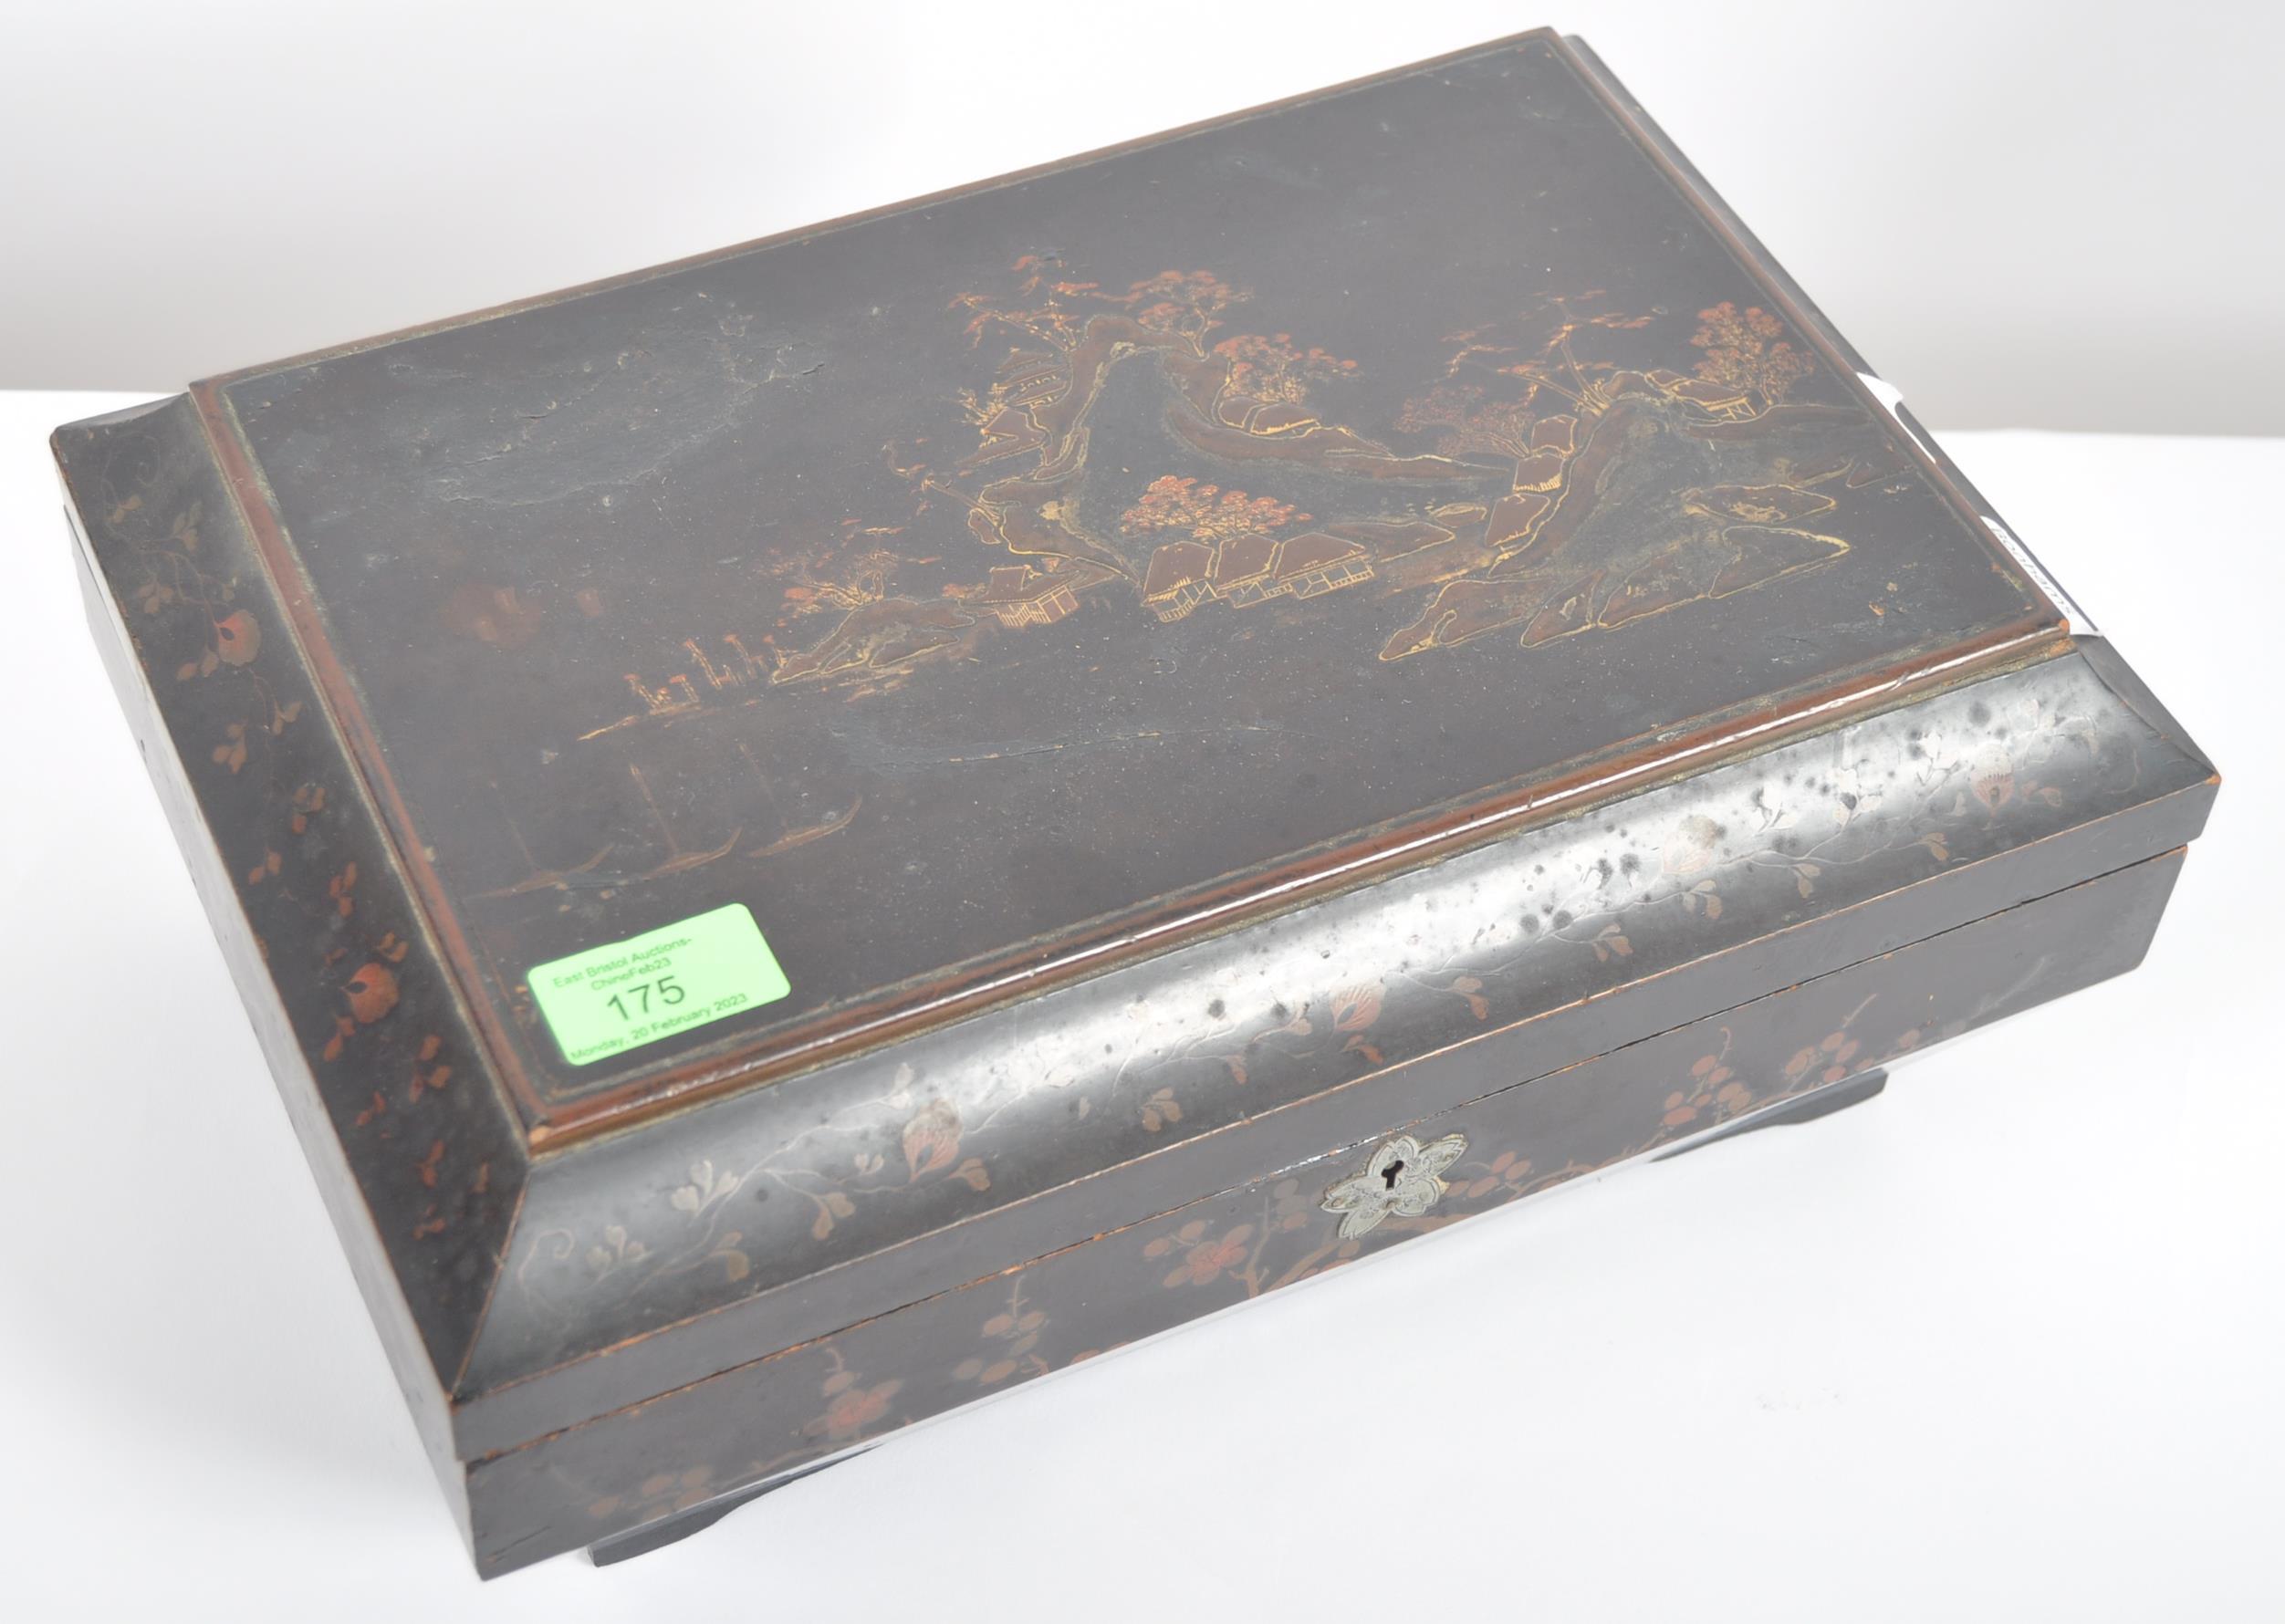 19TH CENTURY JAPANESE BLACK LACQUER BOX - Image 4 of 9